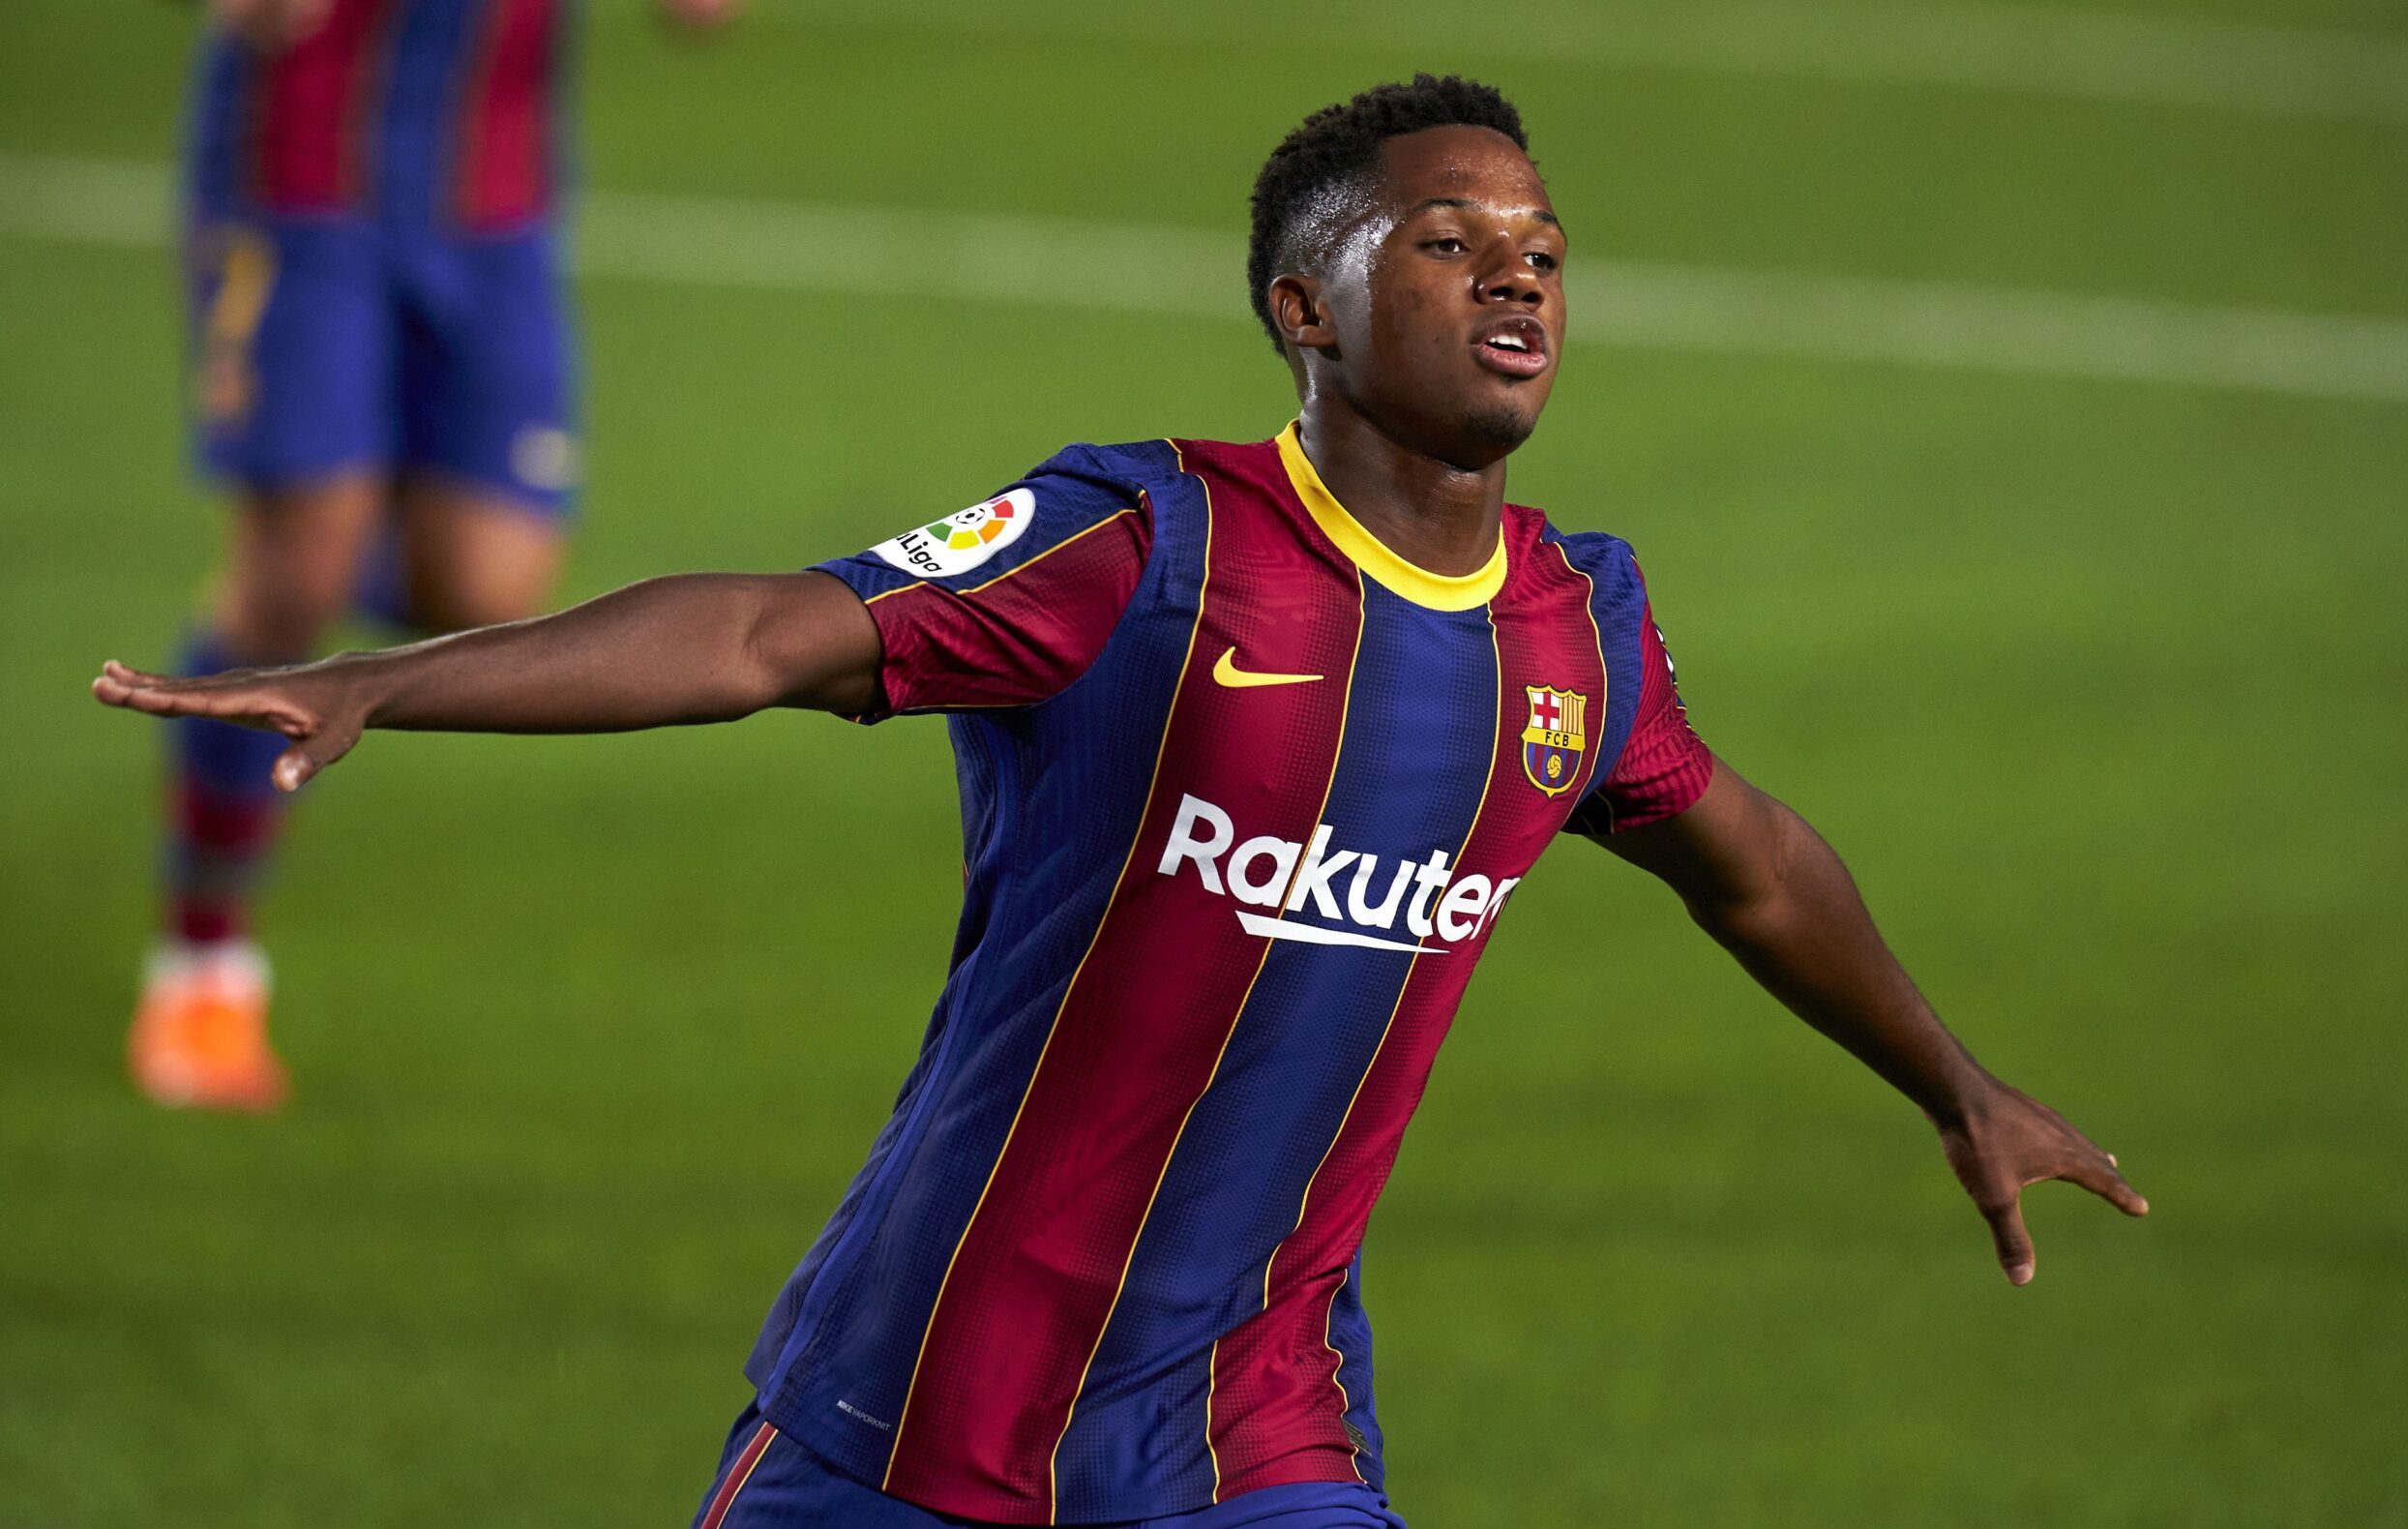 Barcelona's wonderkid Ansu Fati and the fight to become his agent